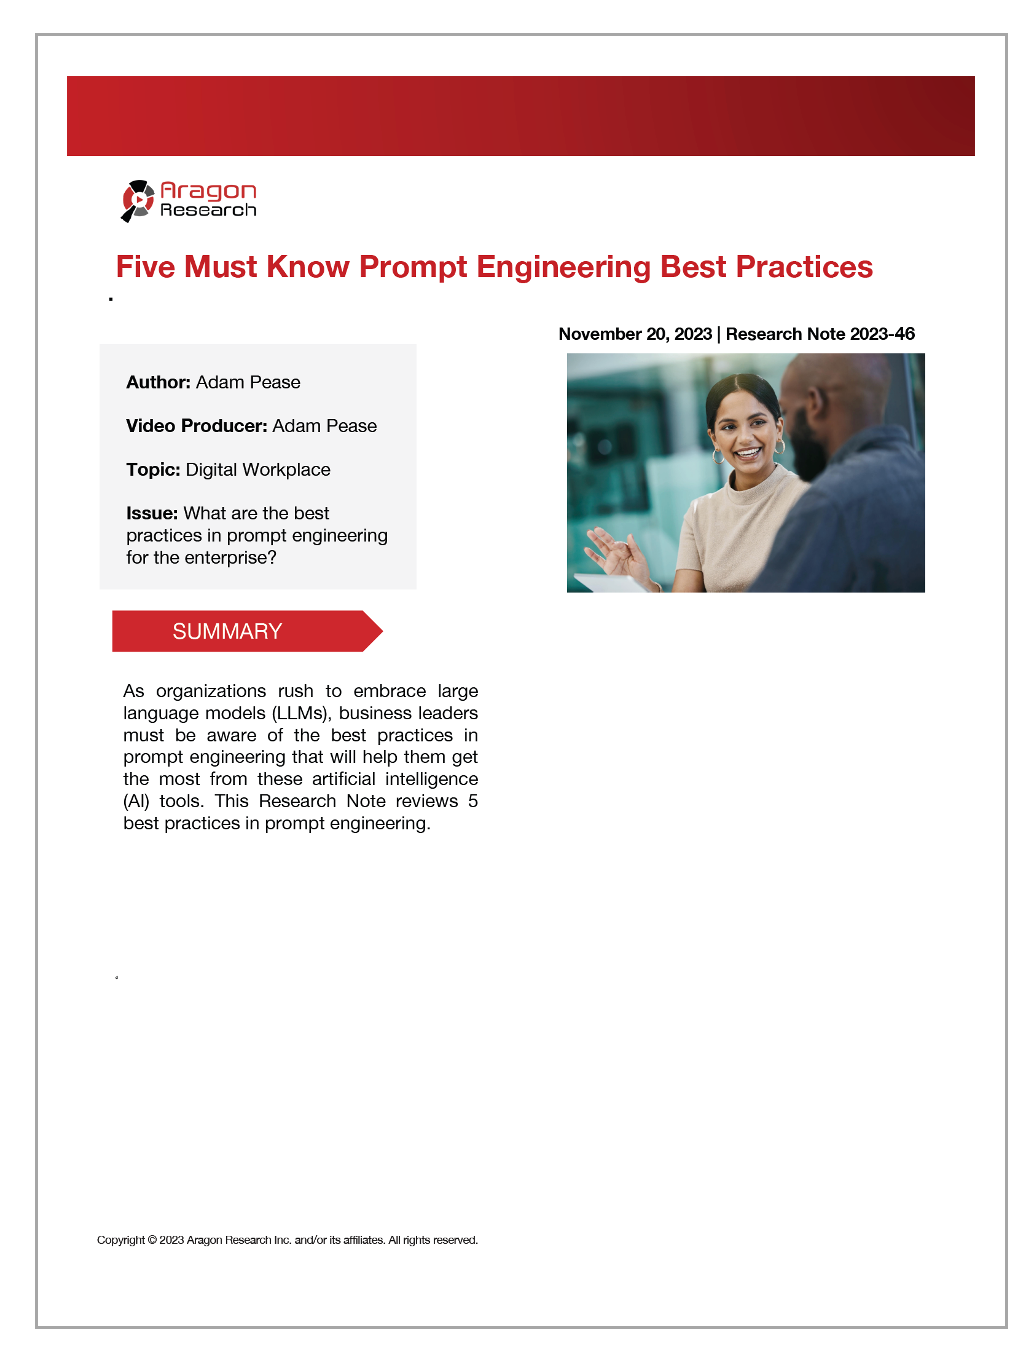 2023-46 Five Must Know Prompt Engineering Best Practices